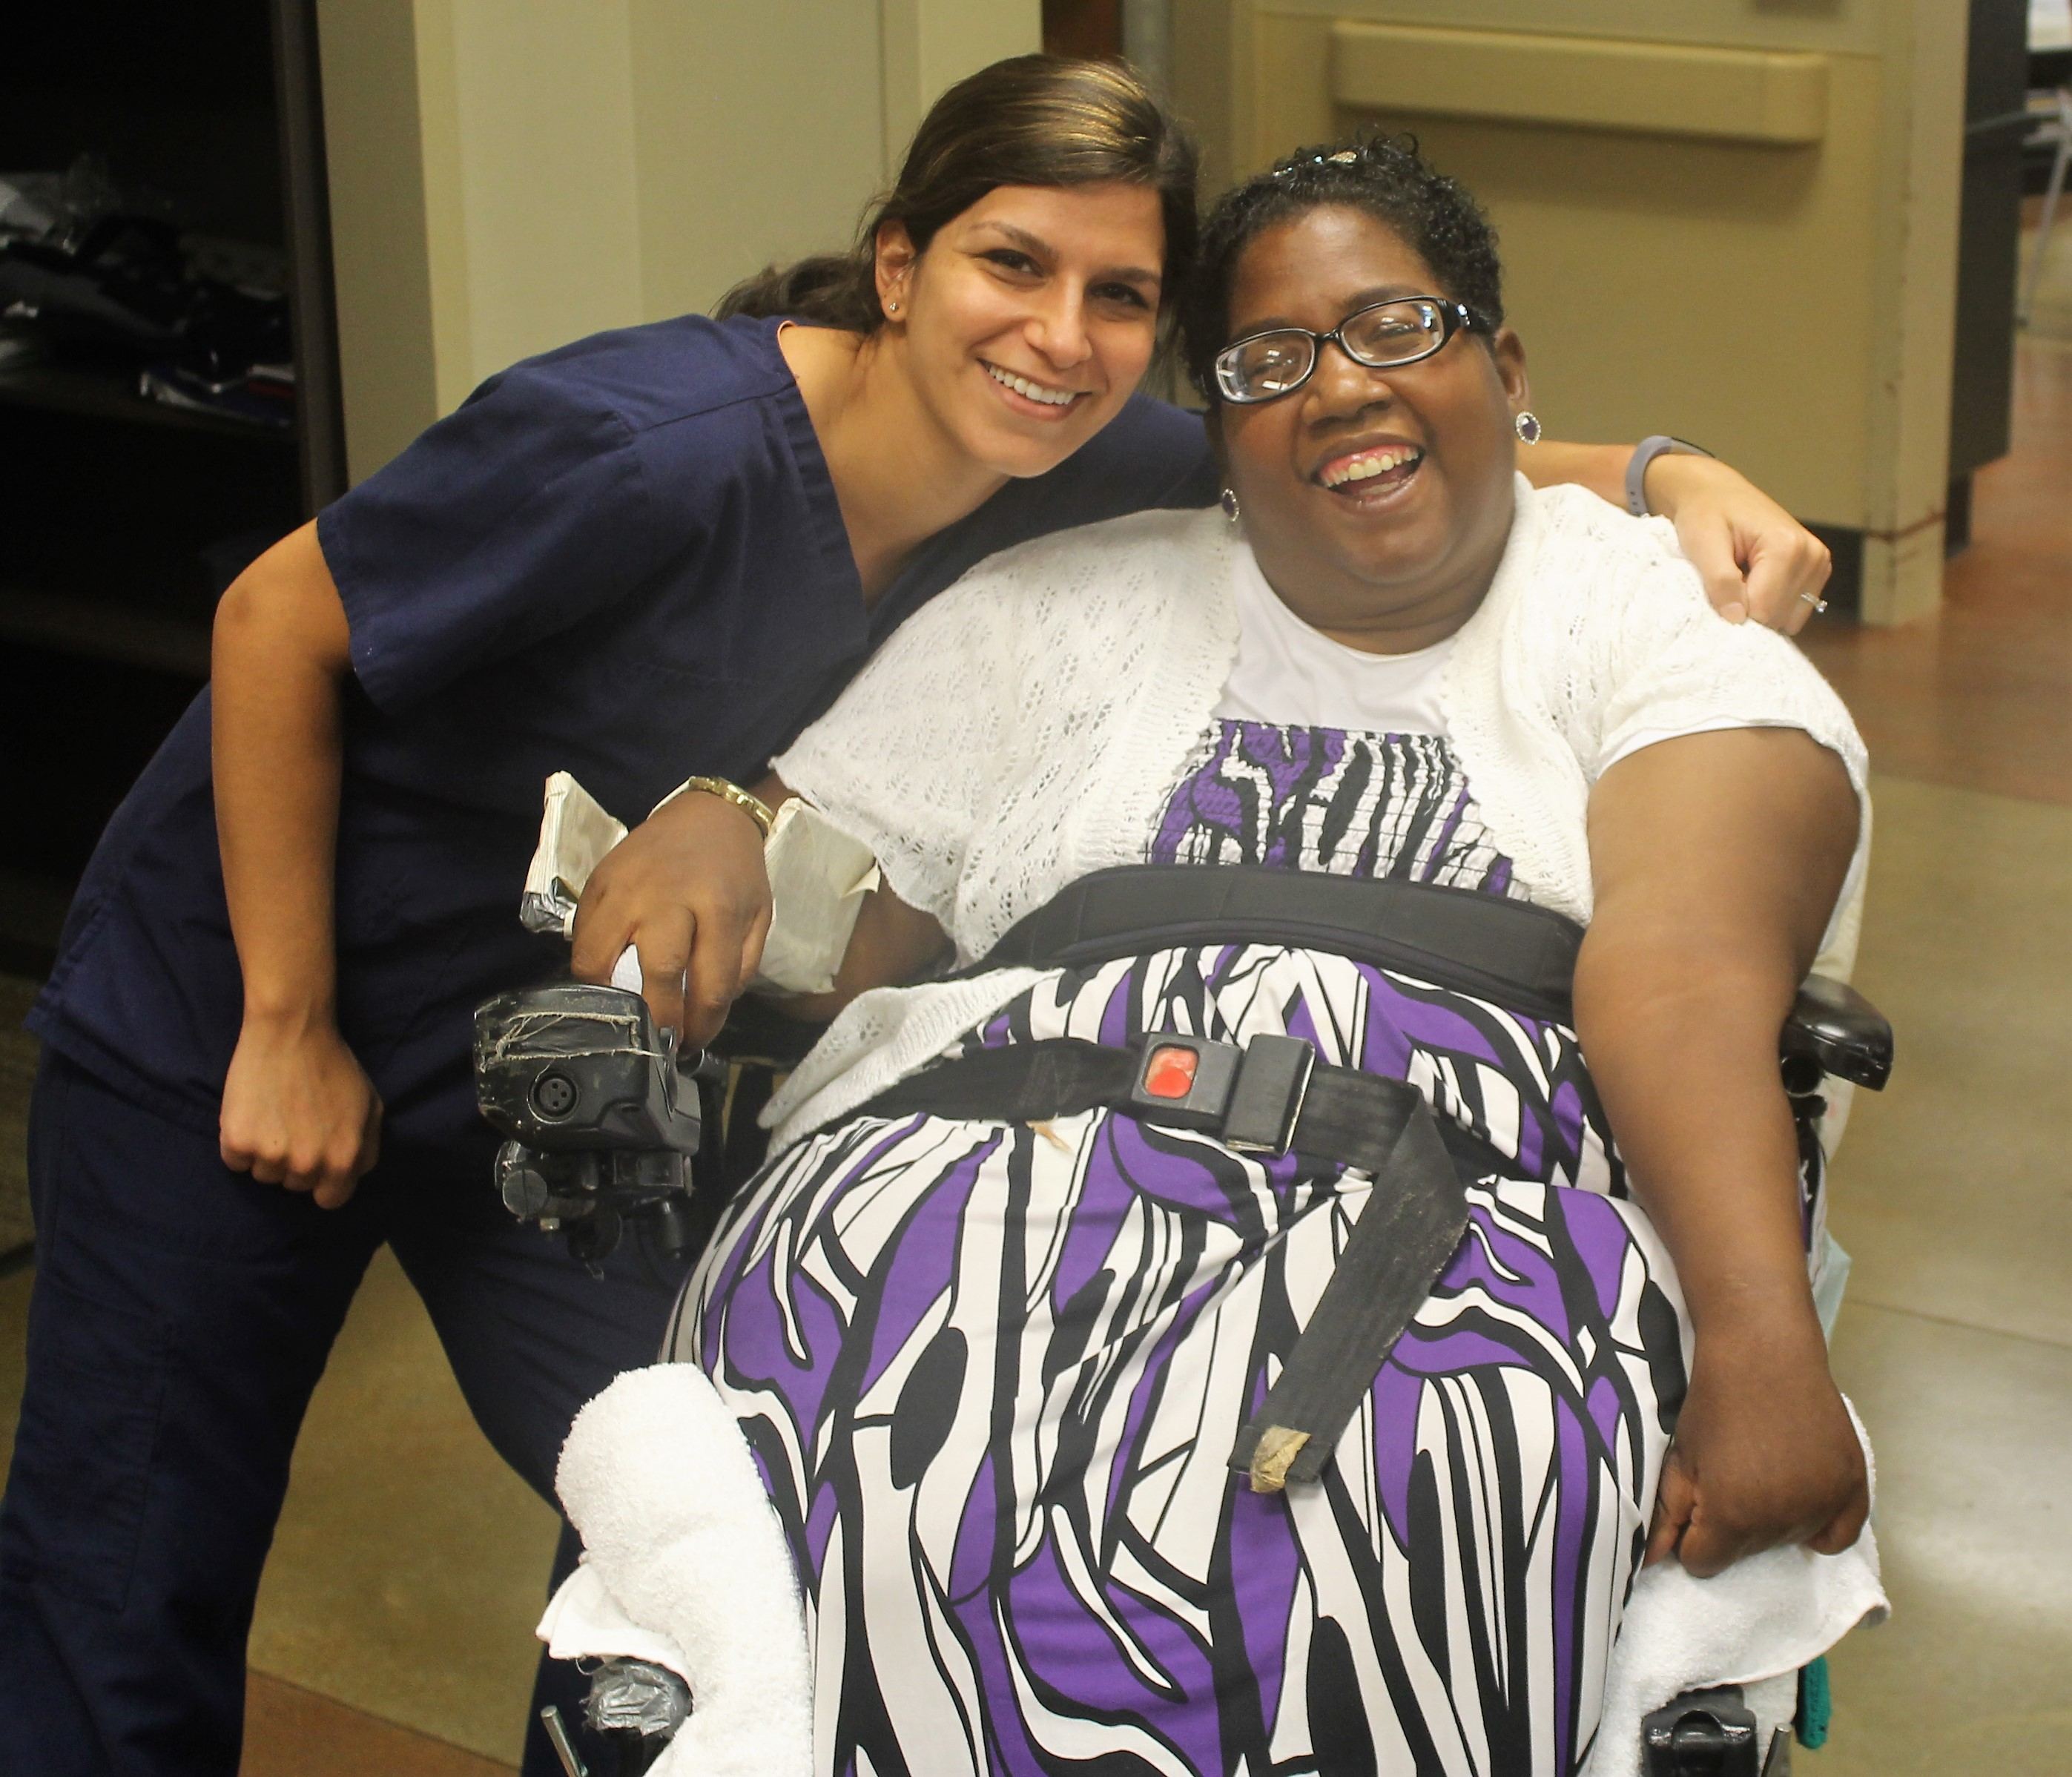 united ability employee and woman in wheel chair smiling